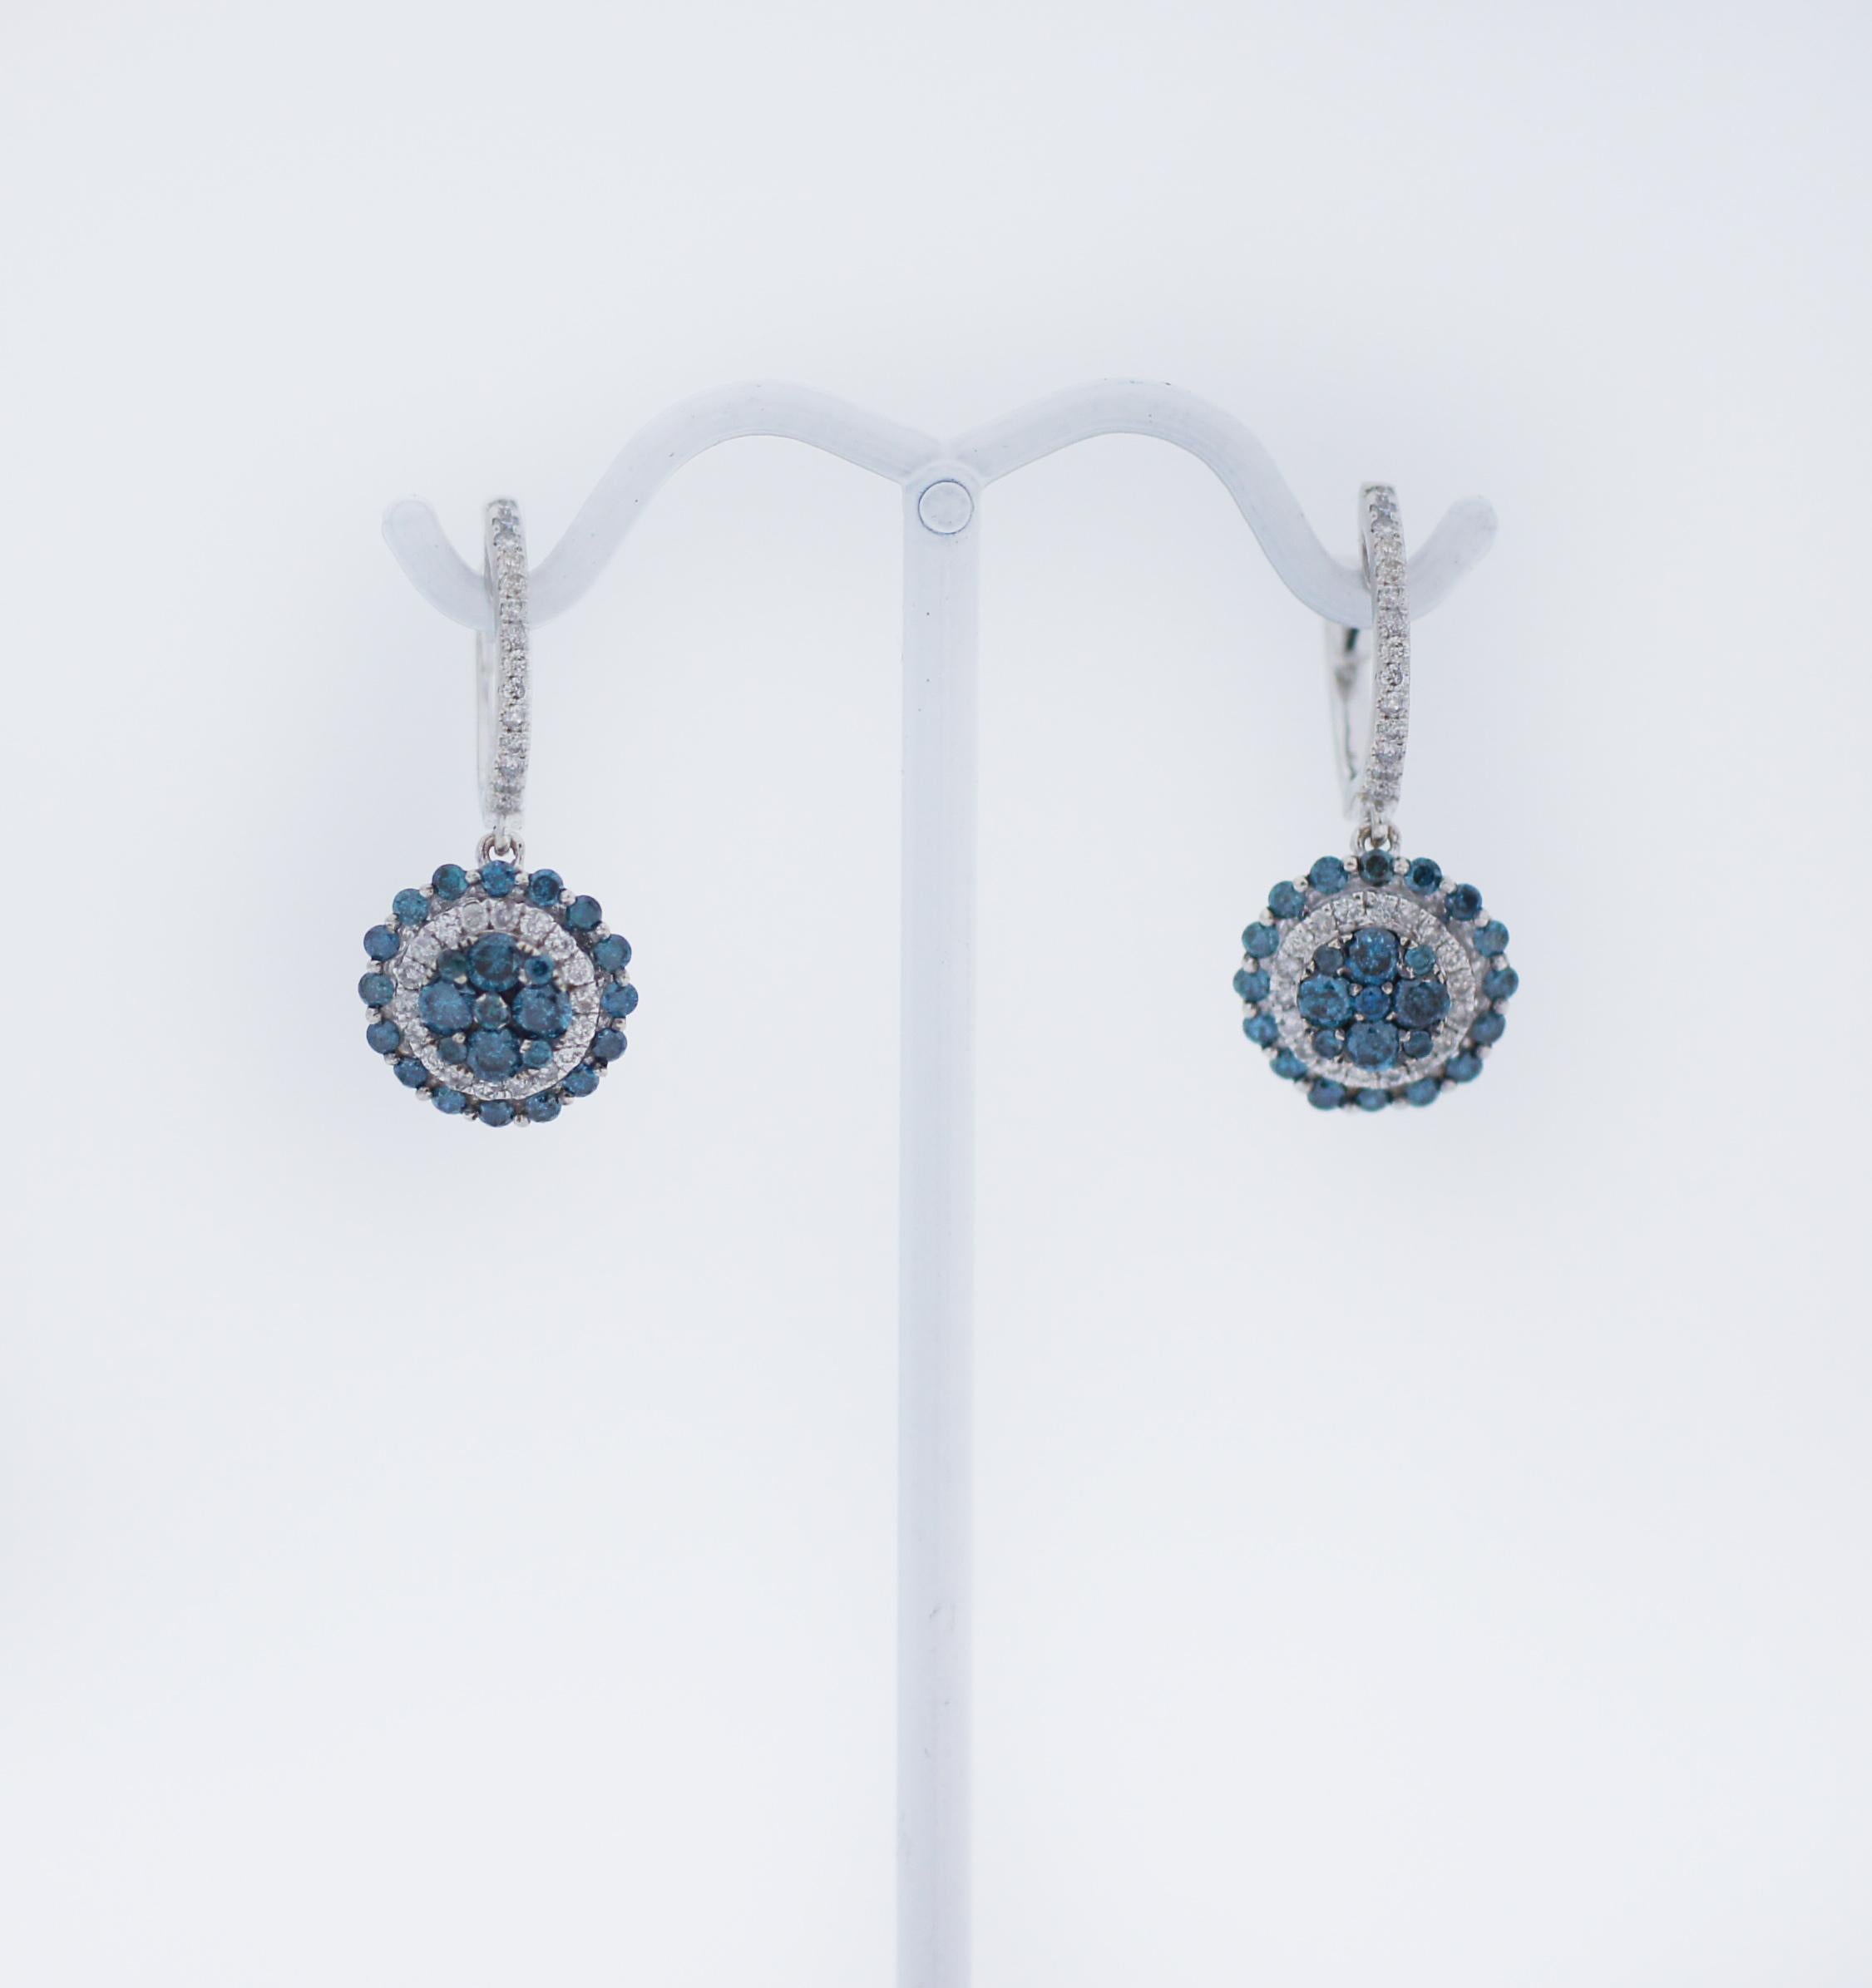 EFFY™ Collection
Elevate your evening attire when you wear these blue and white multi-diamond double frame drop earrings from the EFFY™ Collection.
Fashioned in 14K white gold
Each drop showcases a round composite of multi-sized alluring blue